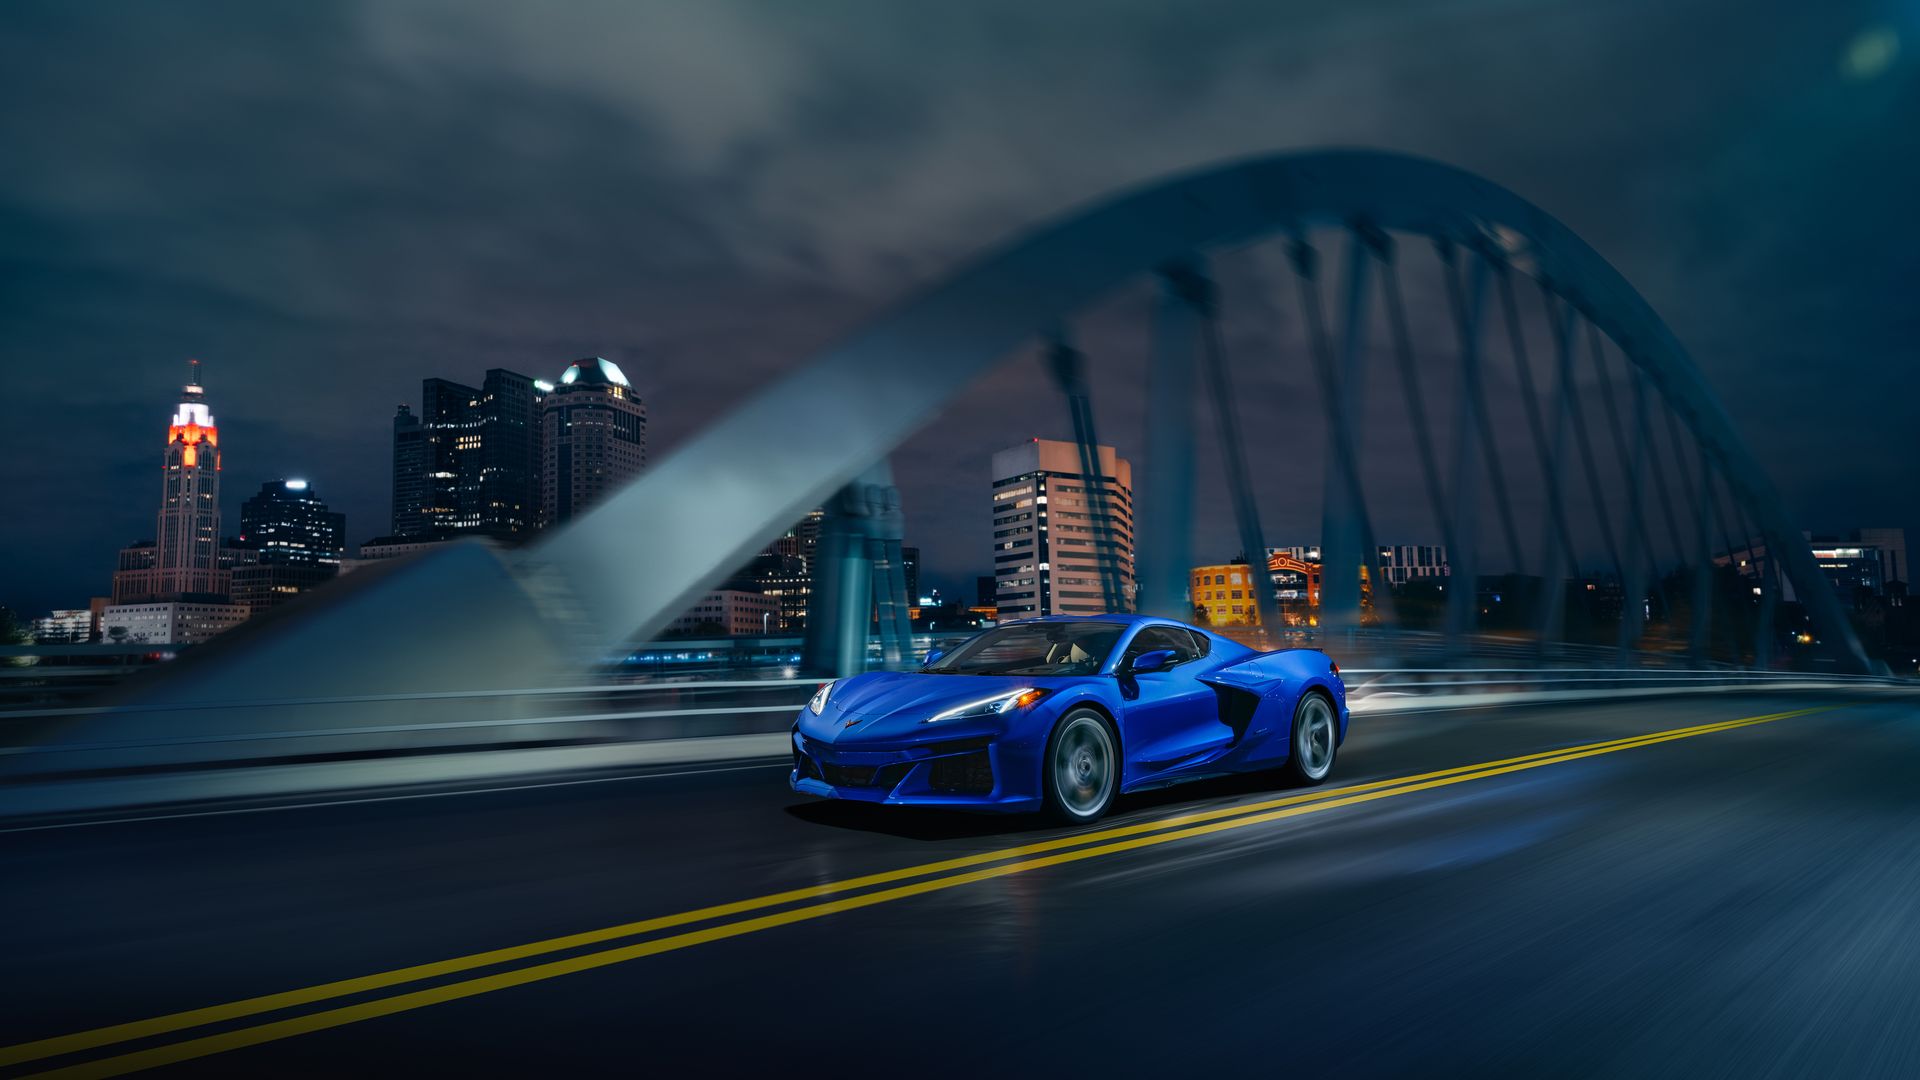 A blue Corvette E-ray driving over the Main Street Bridge at night in a heavily edited photo